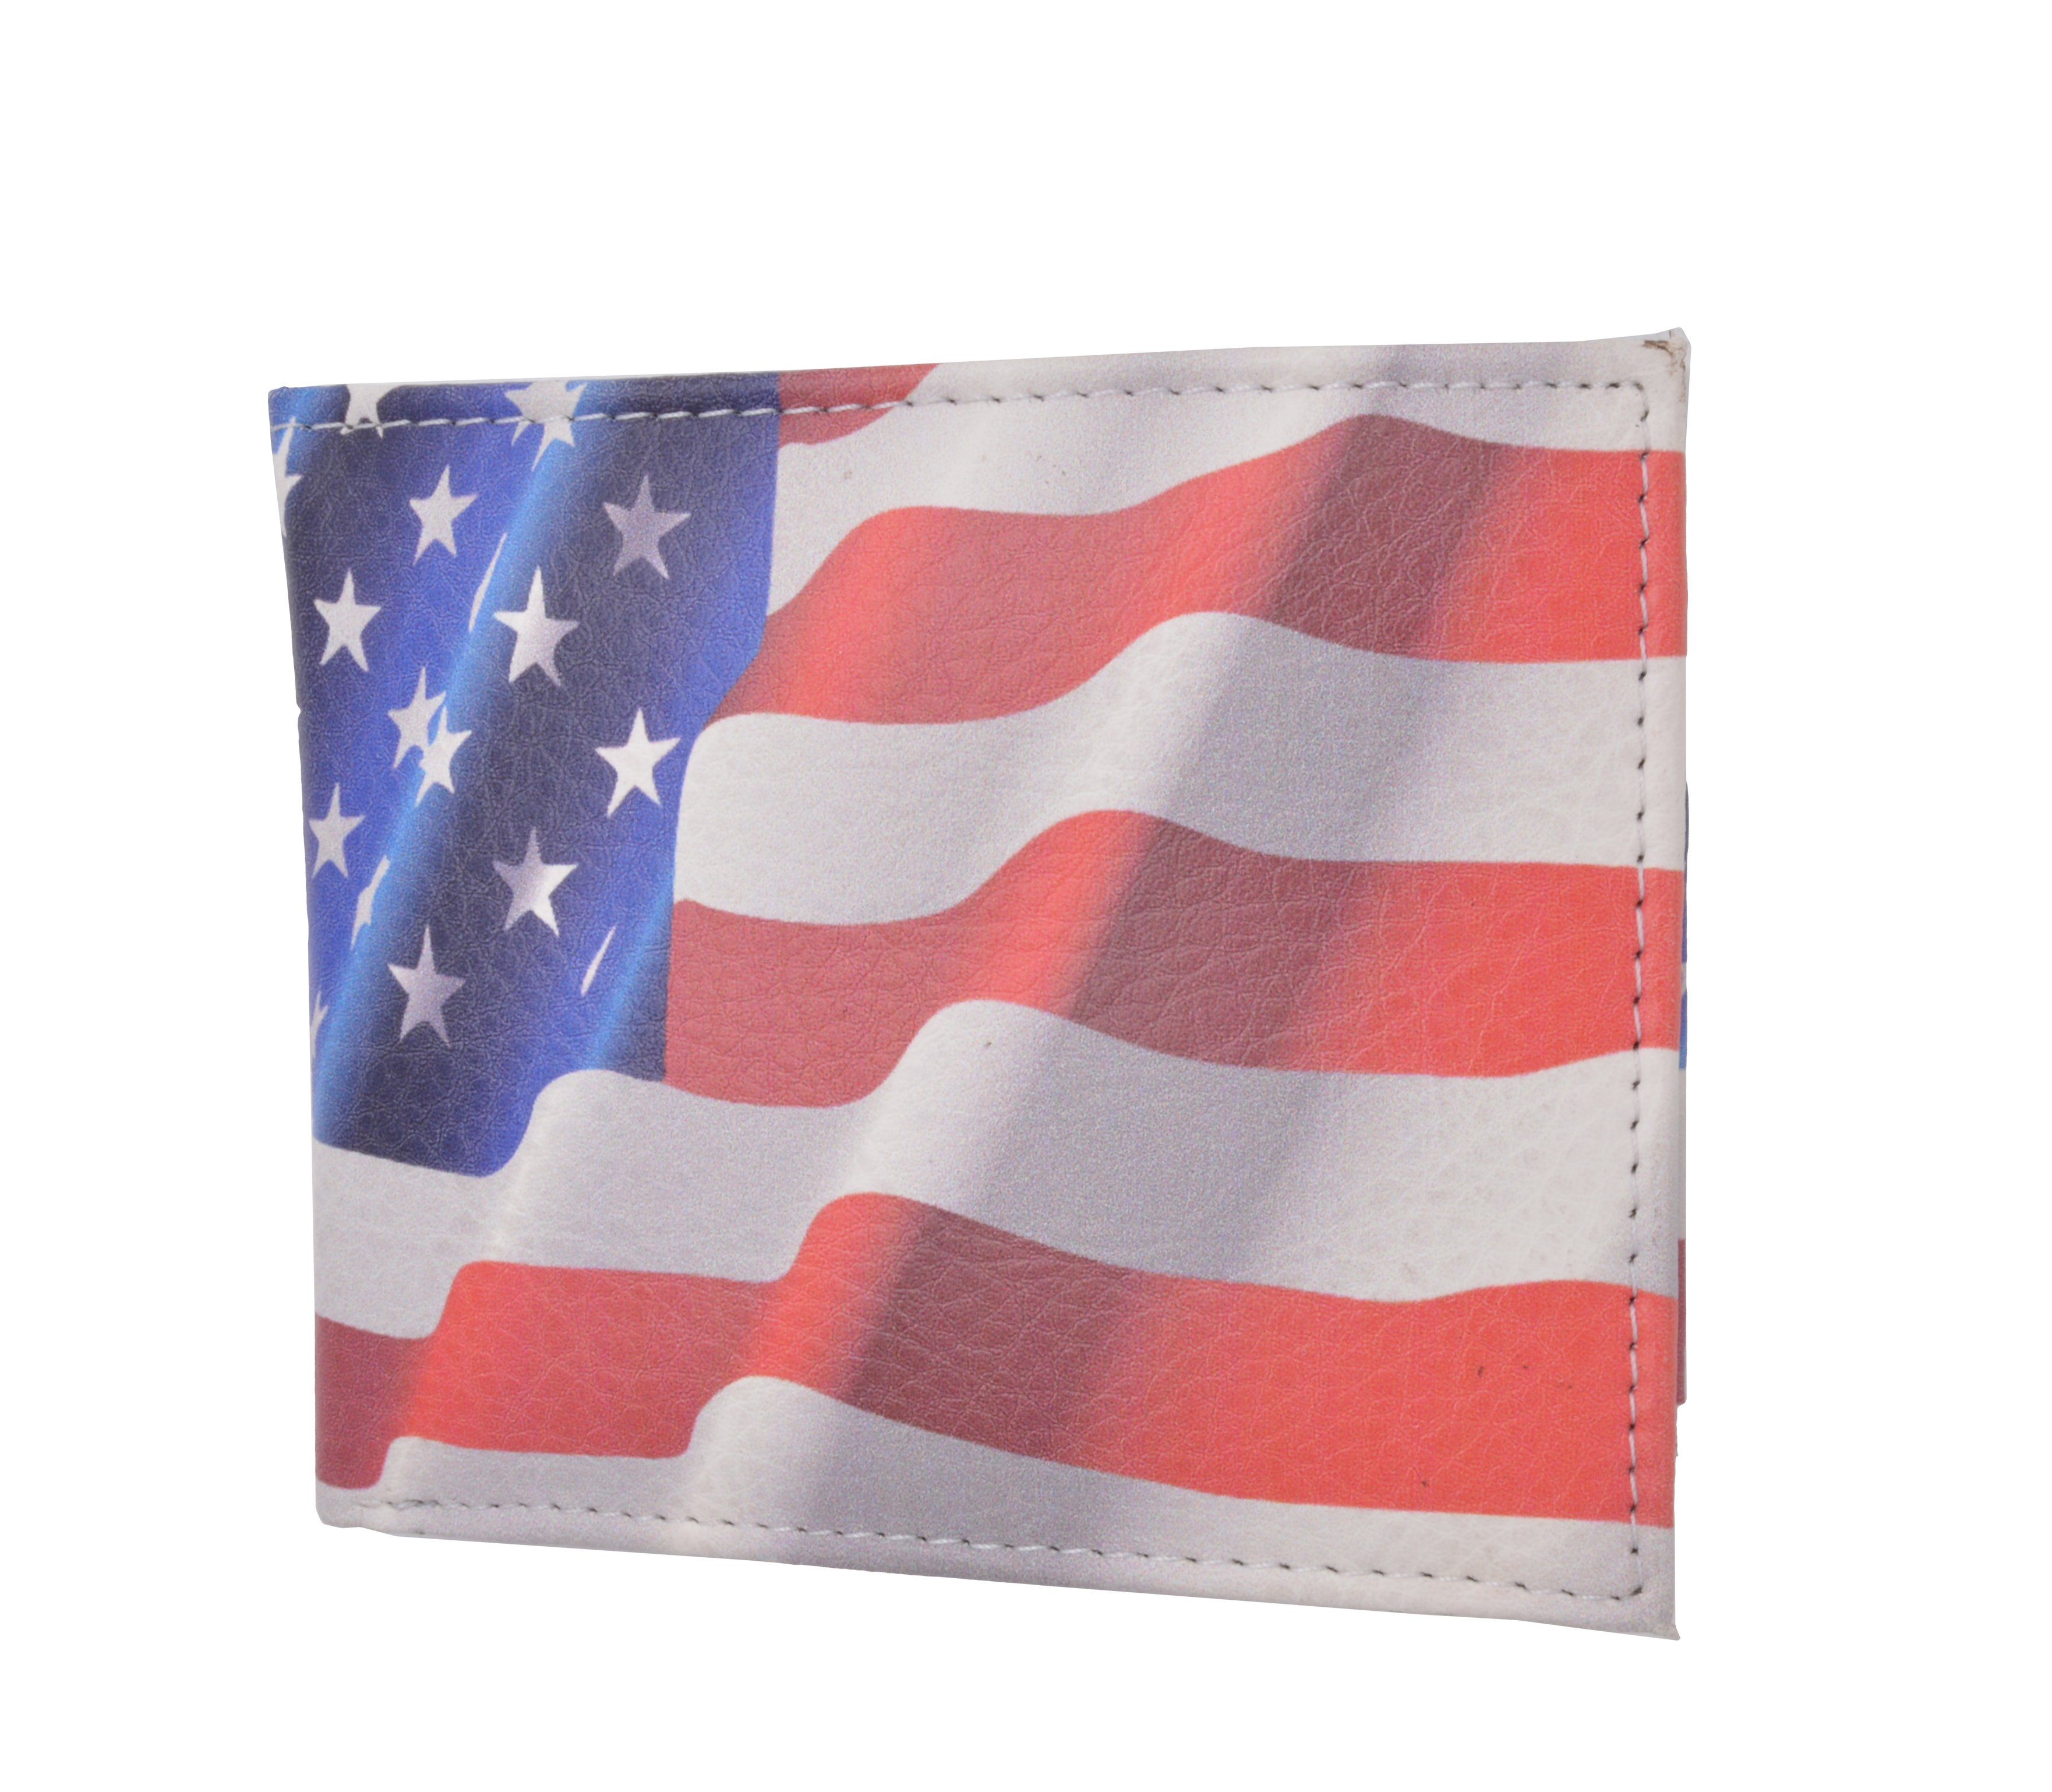 USA Print Inside & Out Genuine Leather Wallet